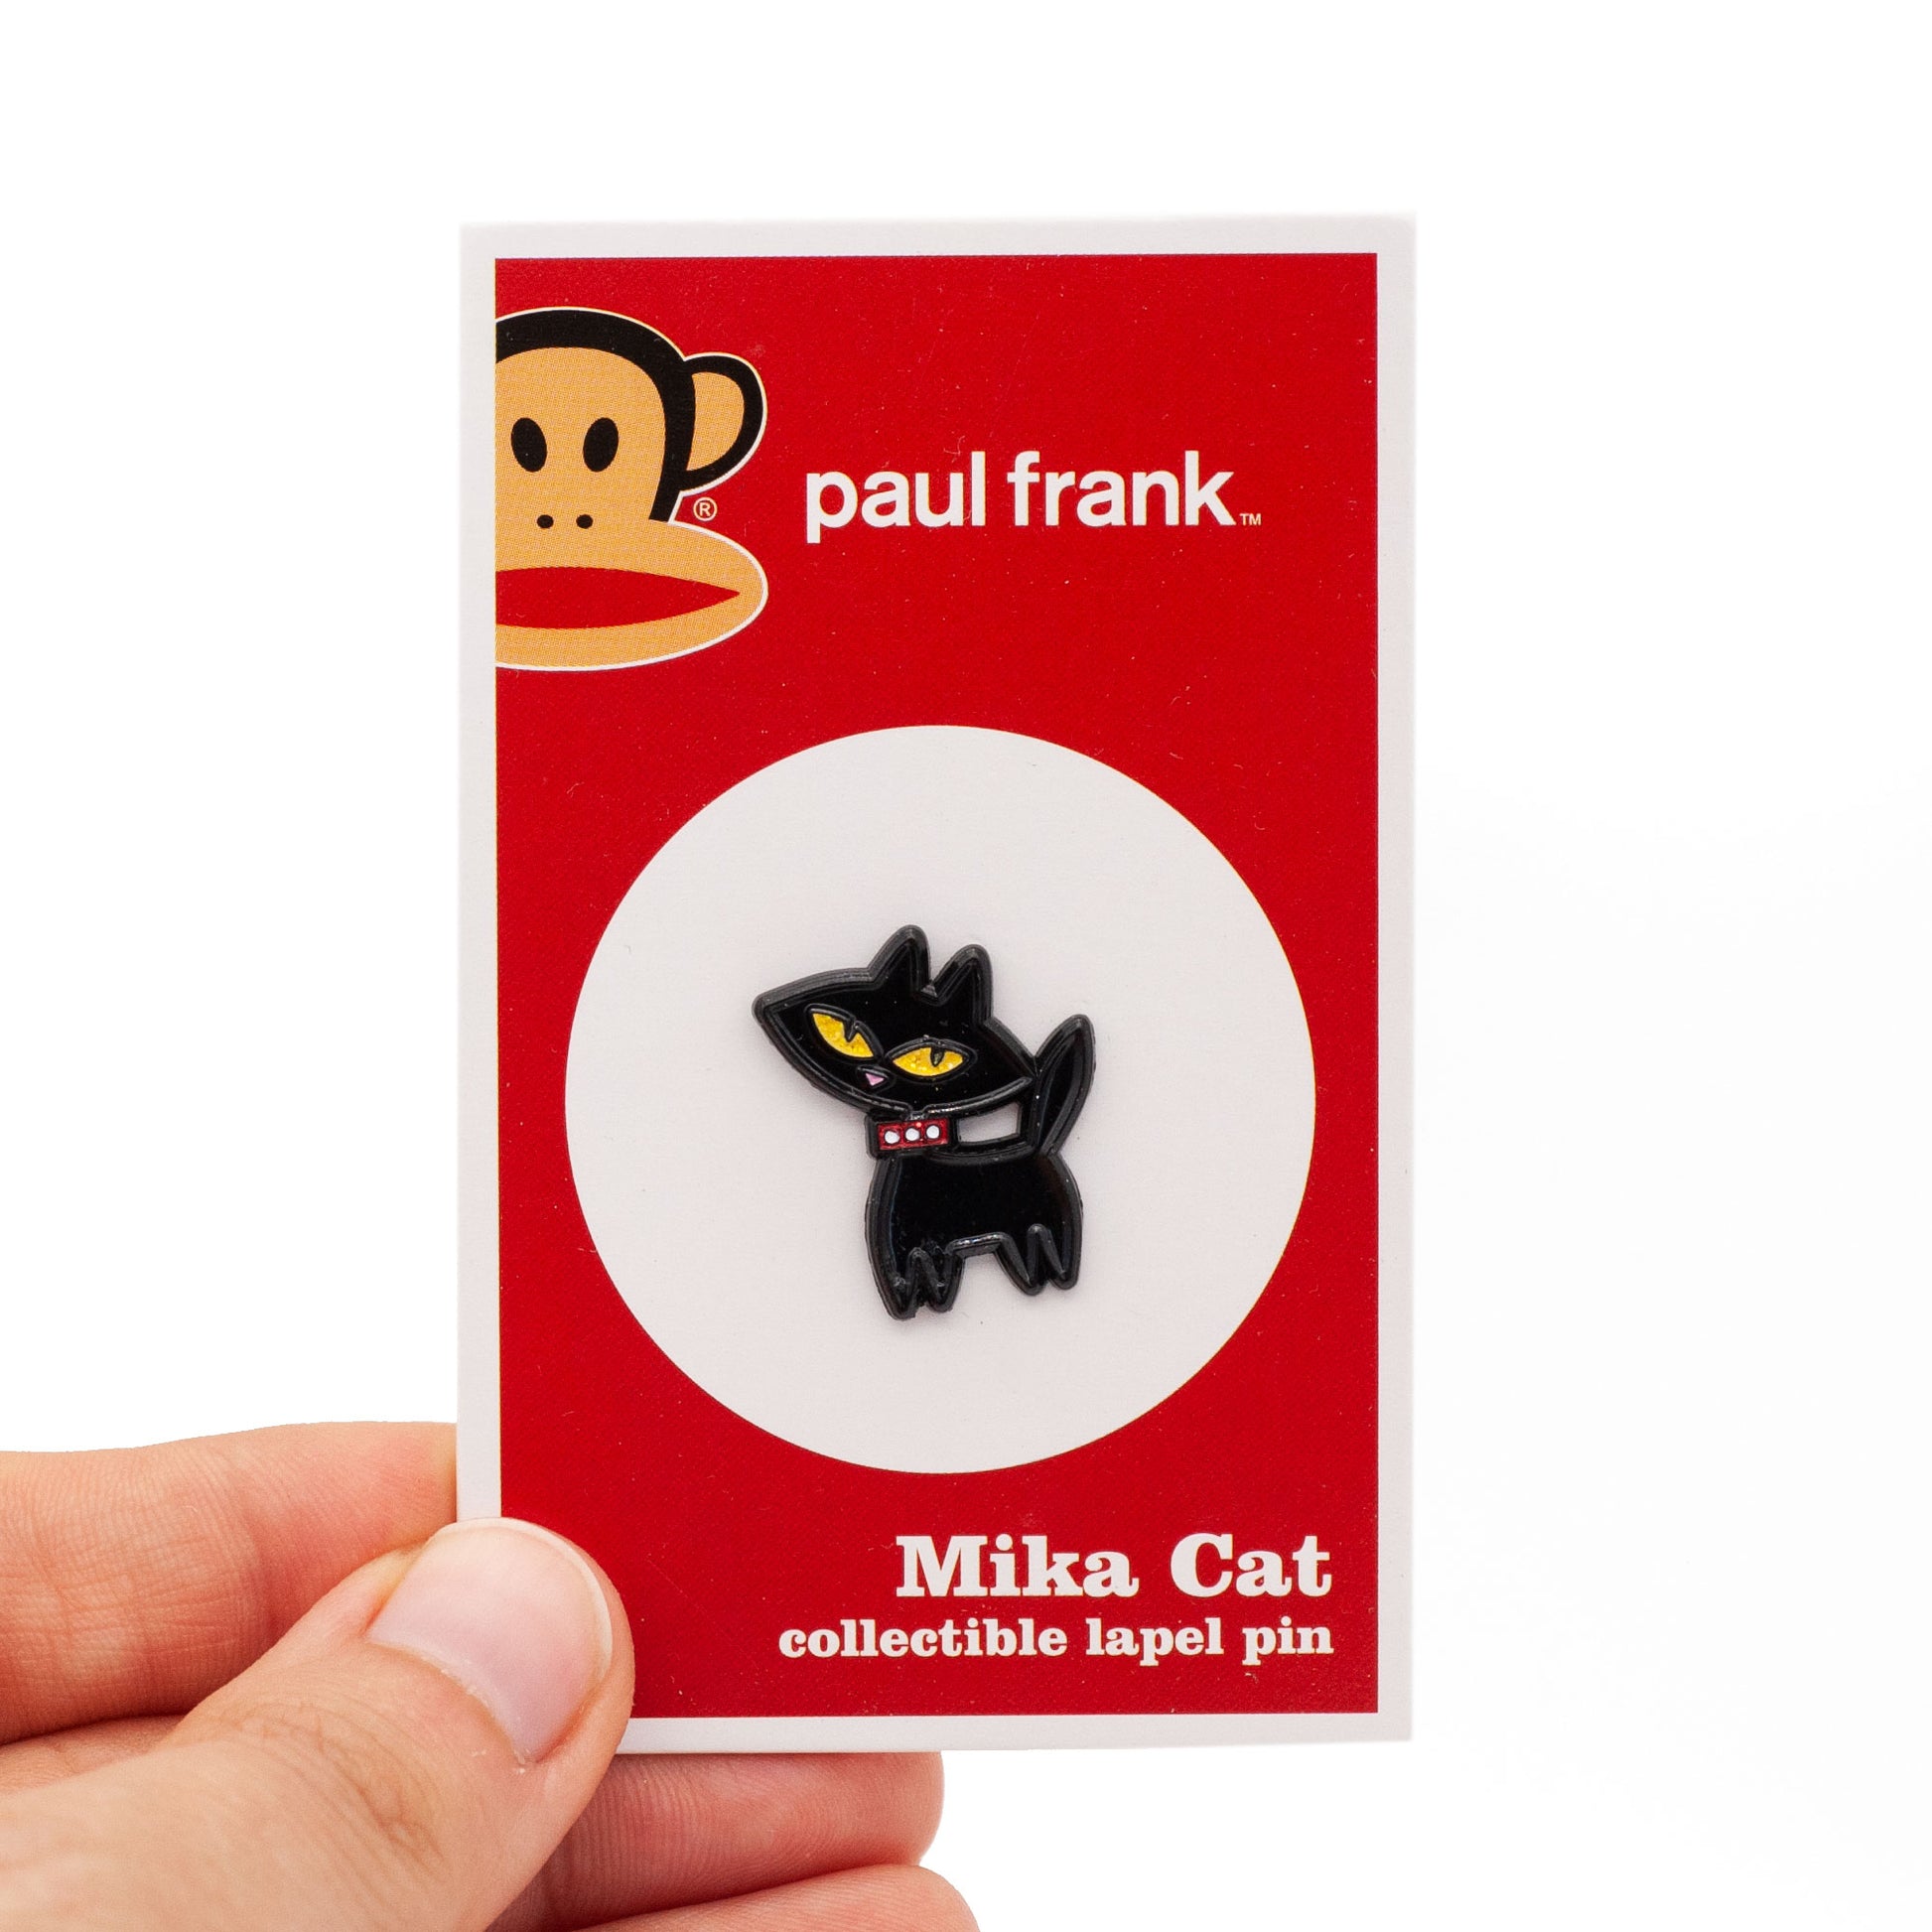 cute black cat enamel pin with yellow eyes and a red collar. On red and white backing card 